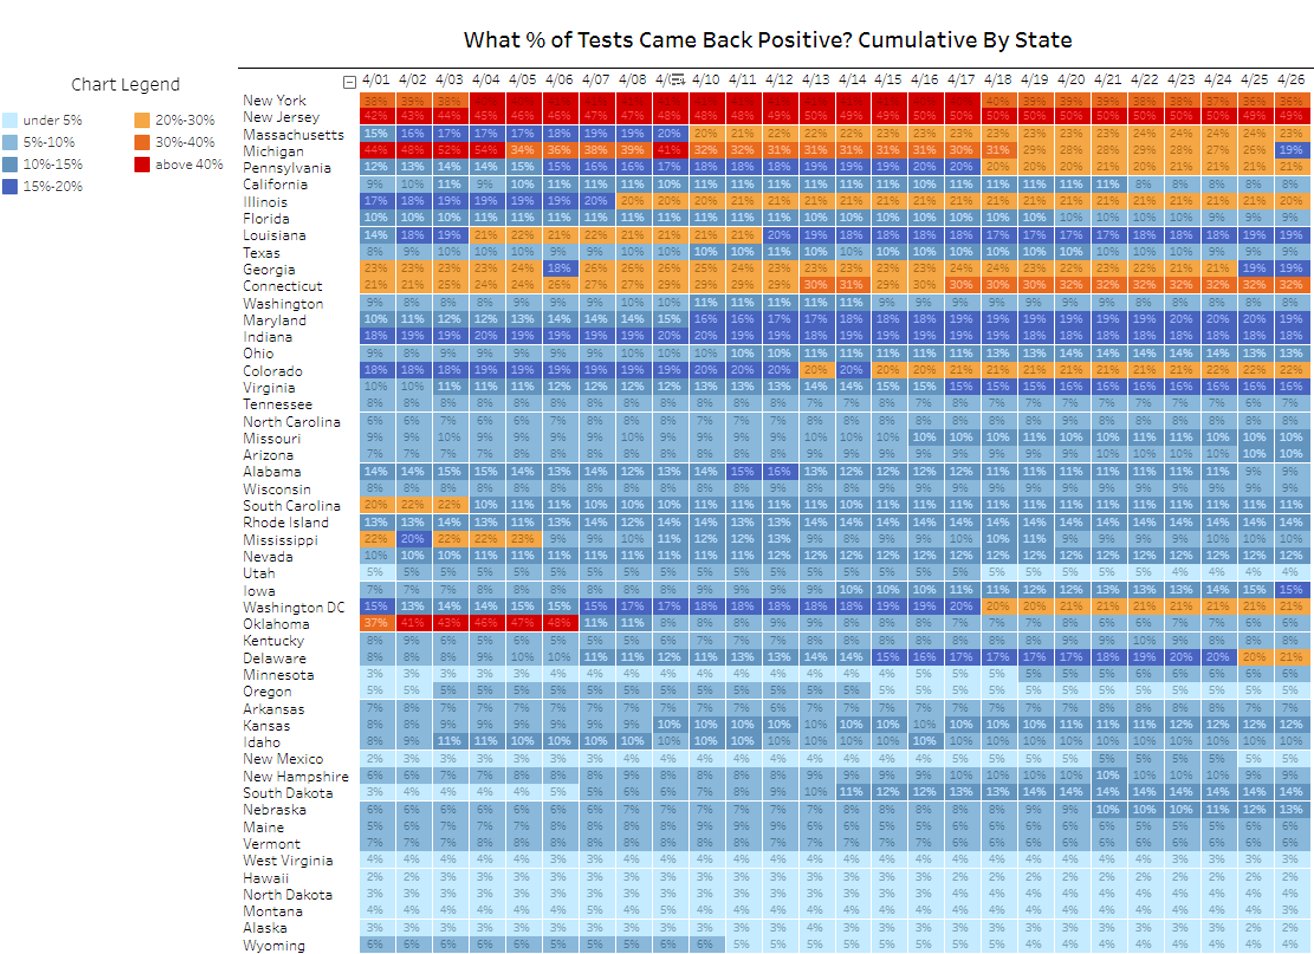 % of Positive Tests by State